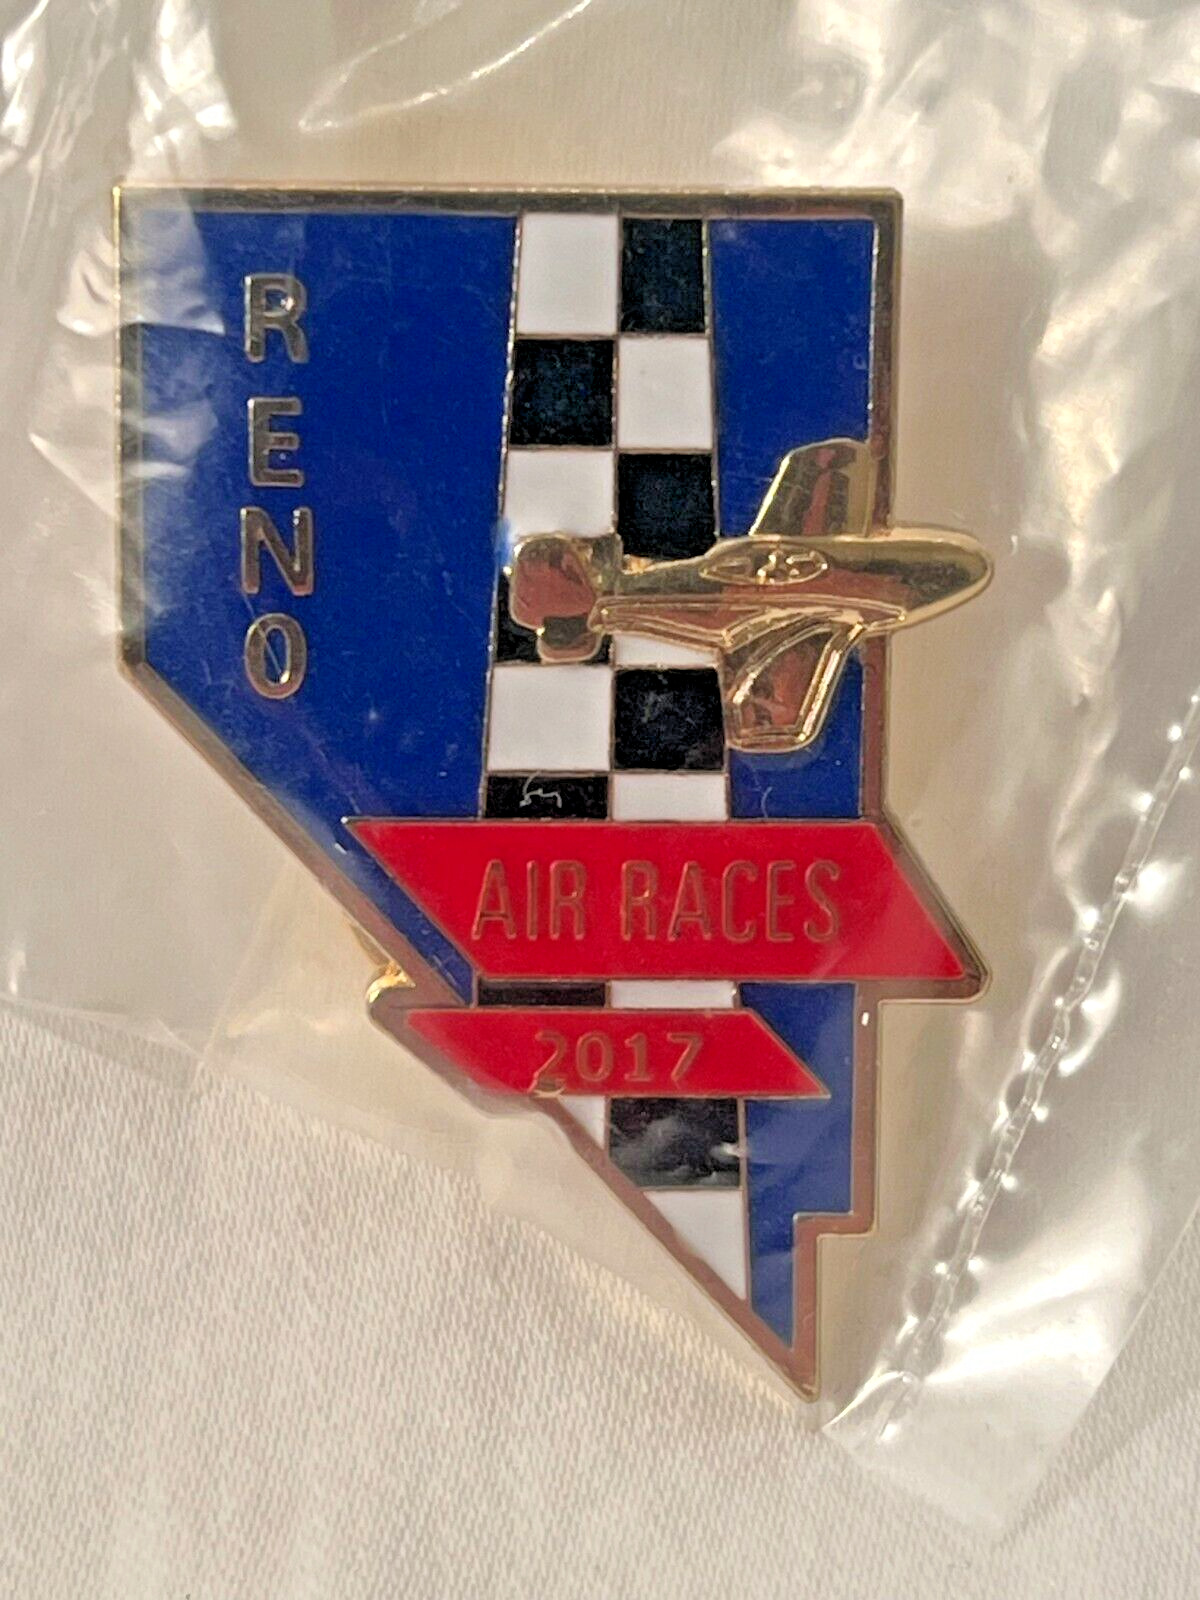 2017 Reno National Championship Air Races Airshow Official Hat Lapel Pin